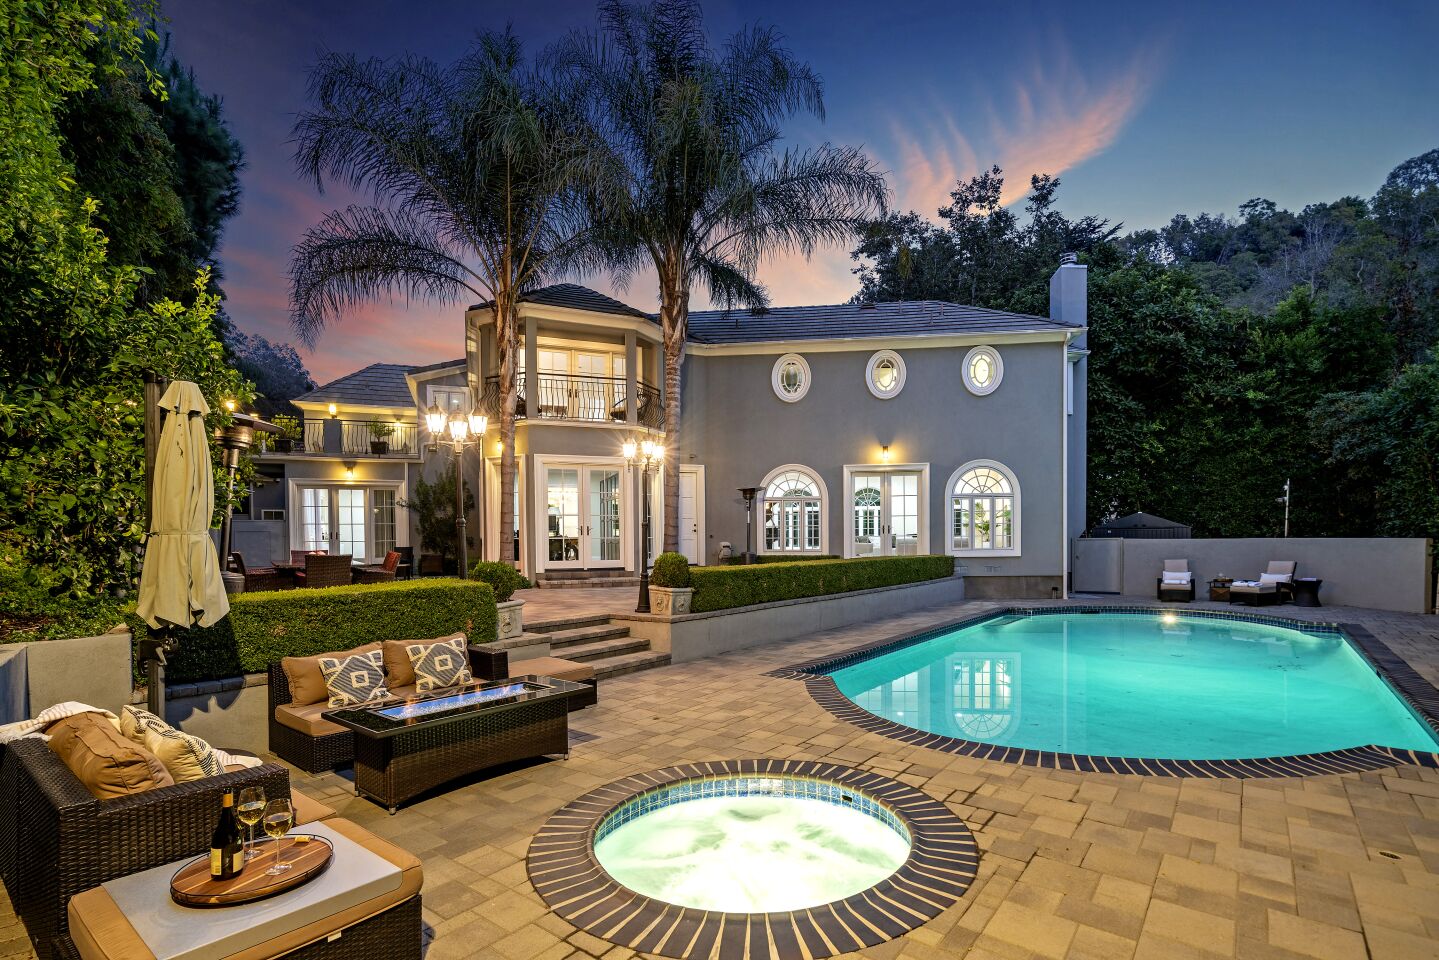 Built in the 1920s for Golden Age of Hollywood actor Errol Flynn, the stylish estate includes a secluded backyard dotted with vintage lampposts and outdoor heaters.